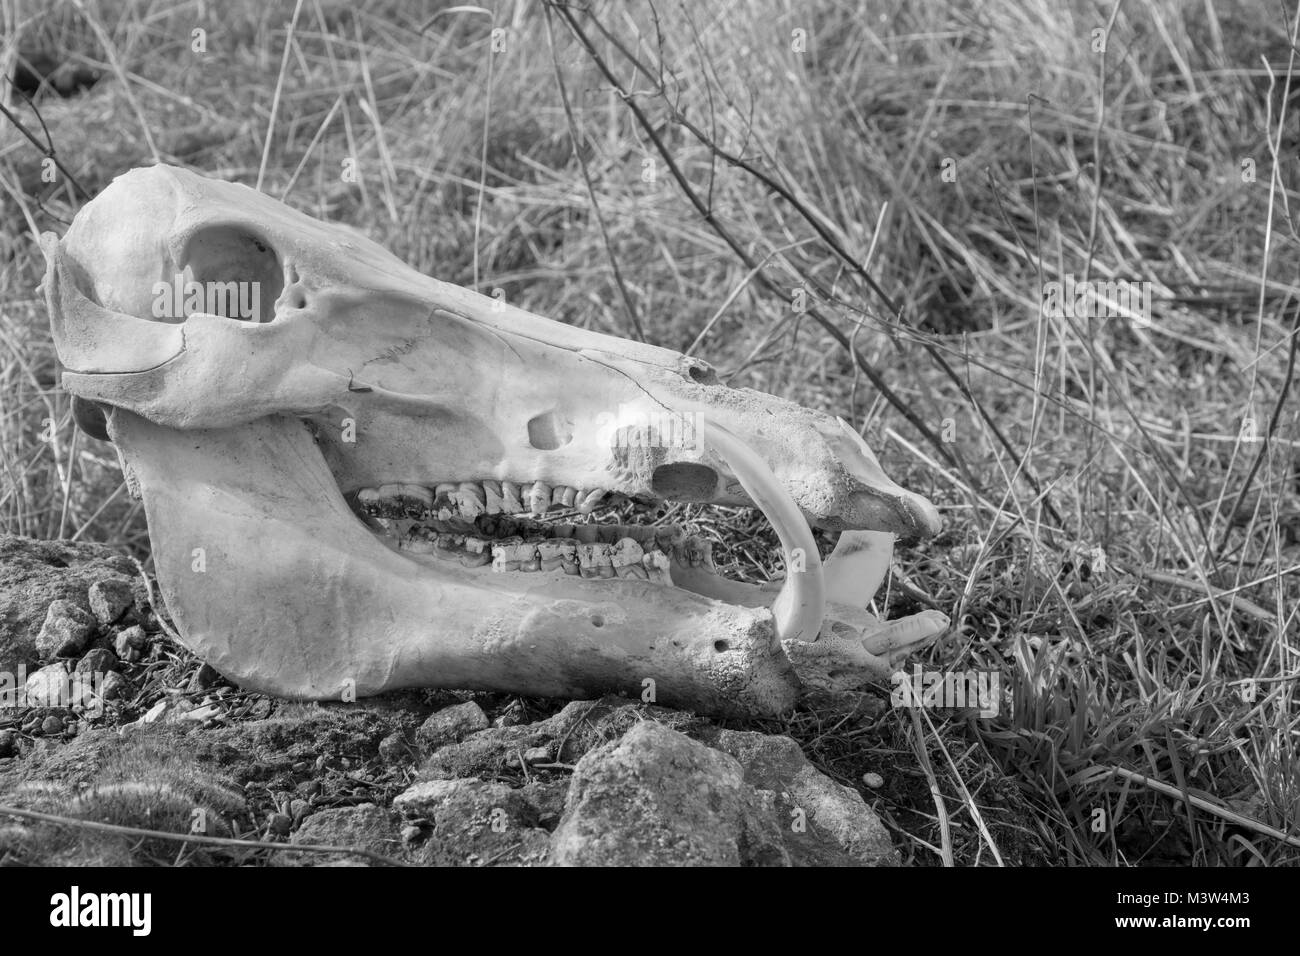 Skull of wild boar on dry grass background, side view, black and white photo Stock Photo